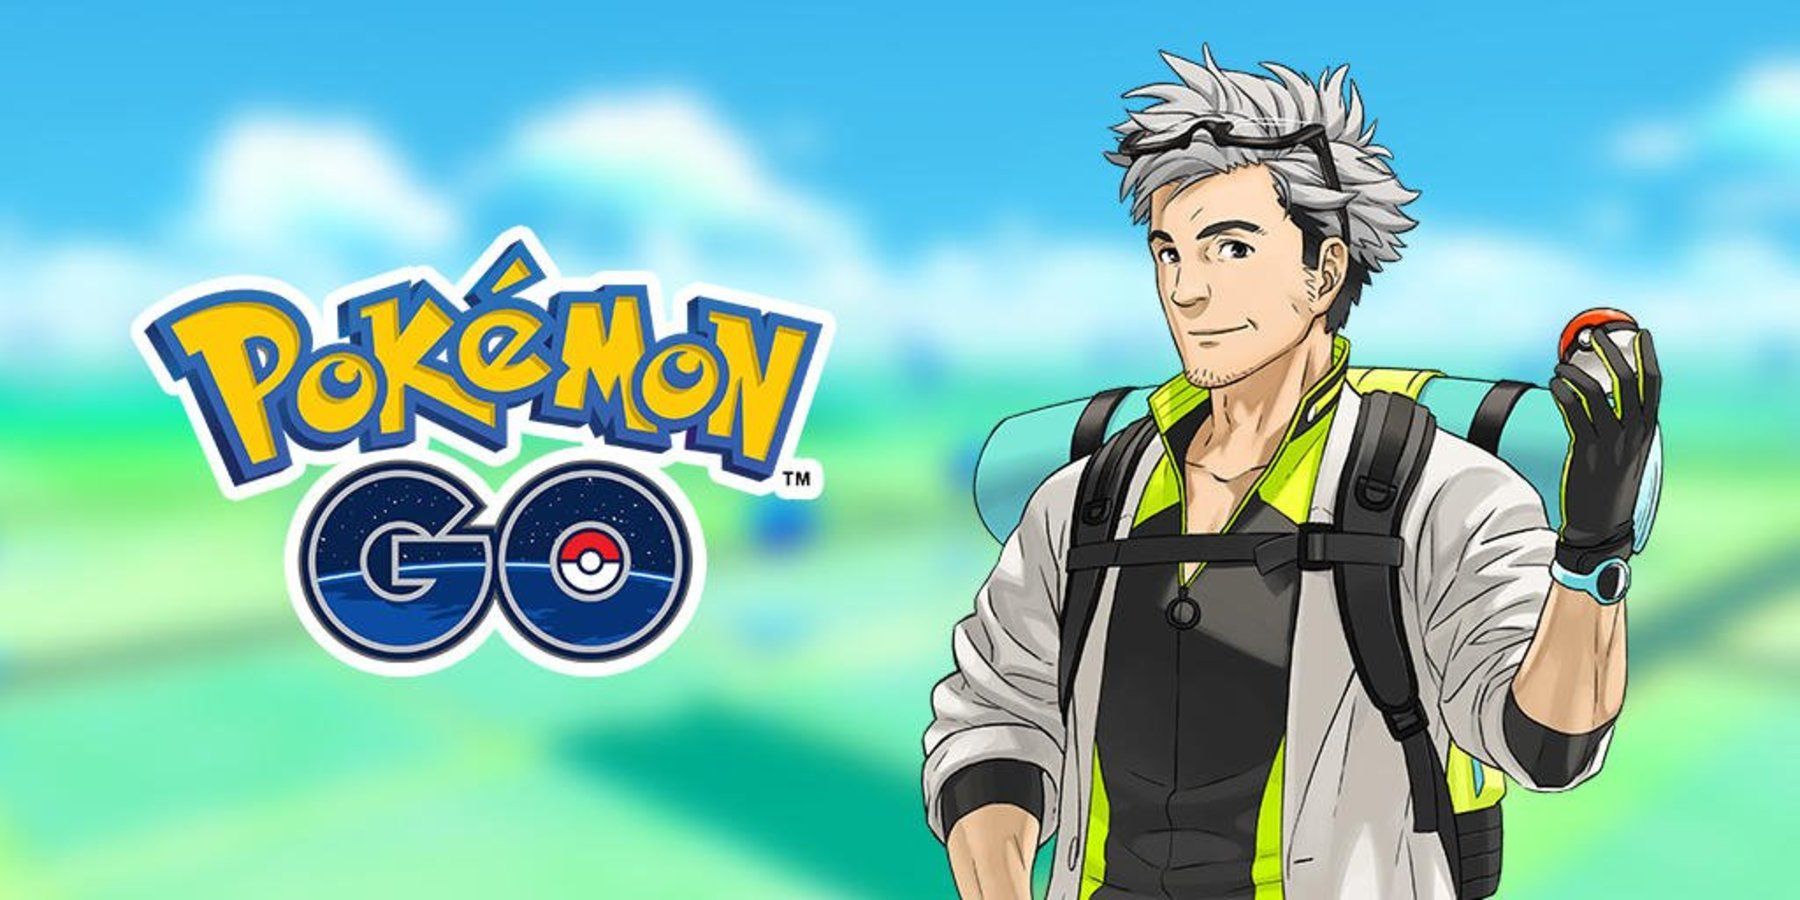 Pokemon GO Professor Willow S New Look Should Lead To More Visual Updates